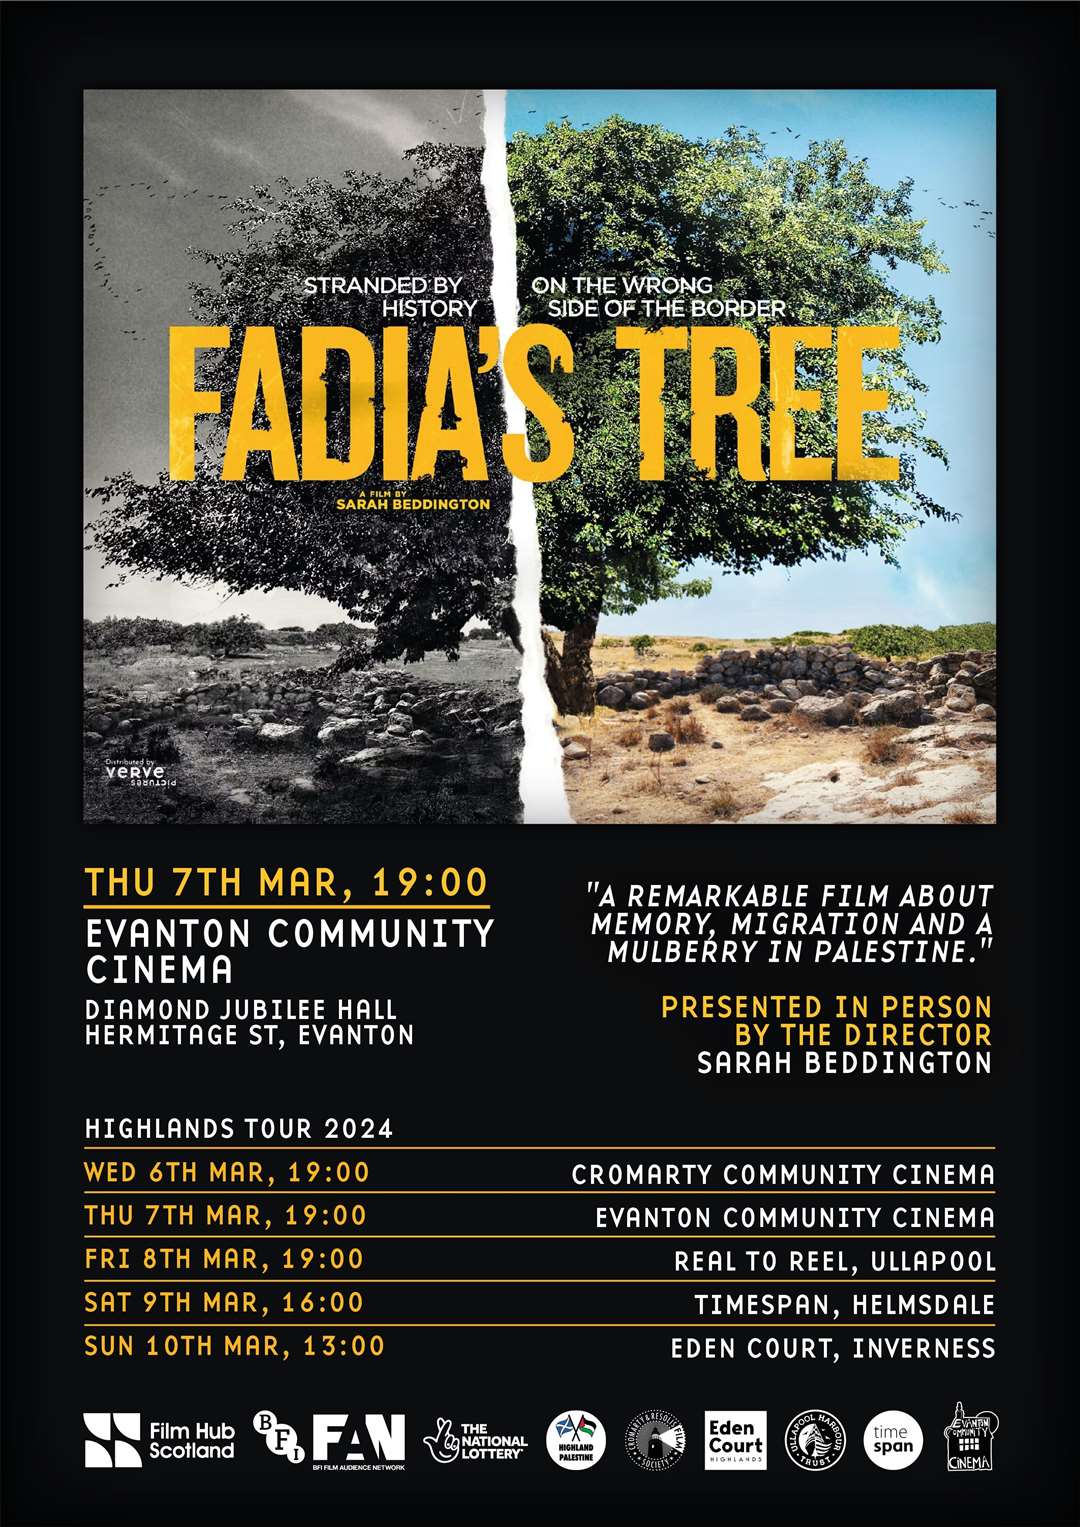 Fadia's Tree is being brought to three Ross-shire communities during a series of five screenings in the Highlands.